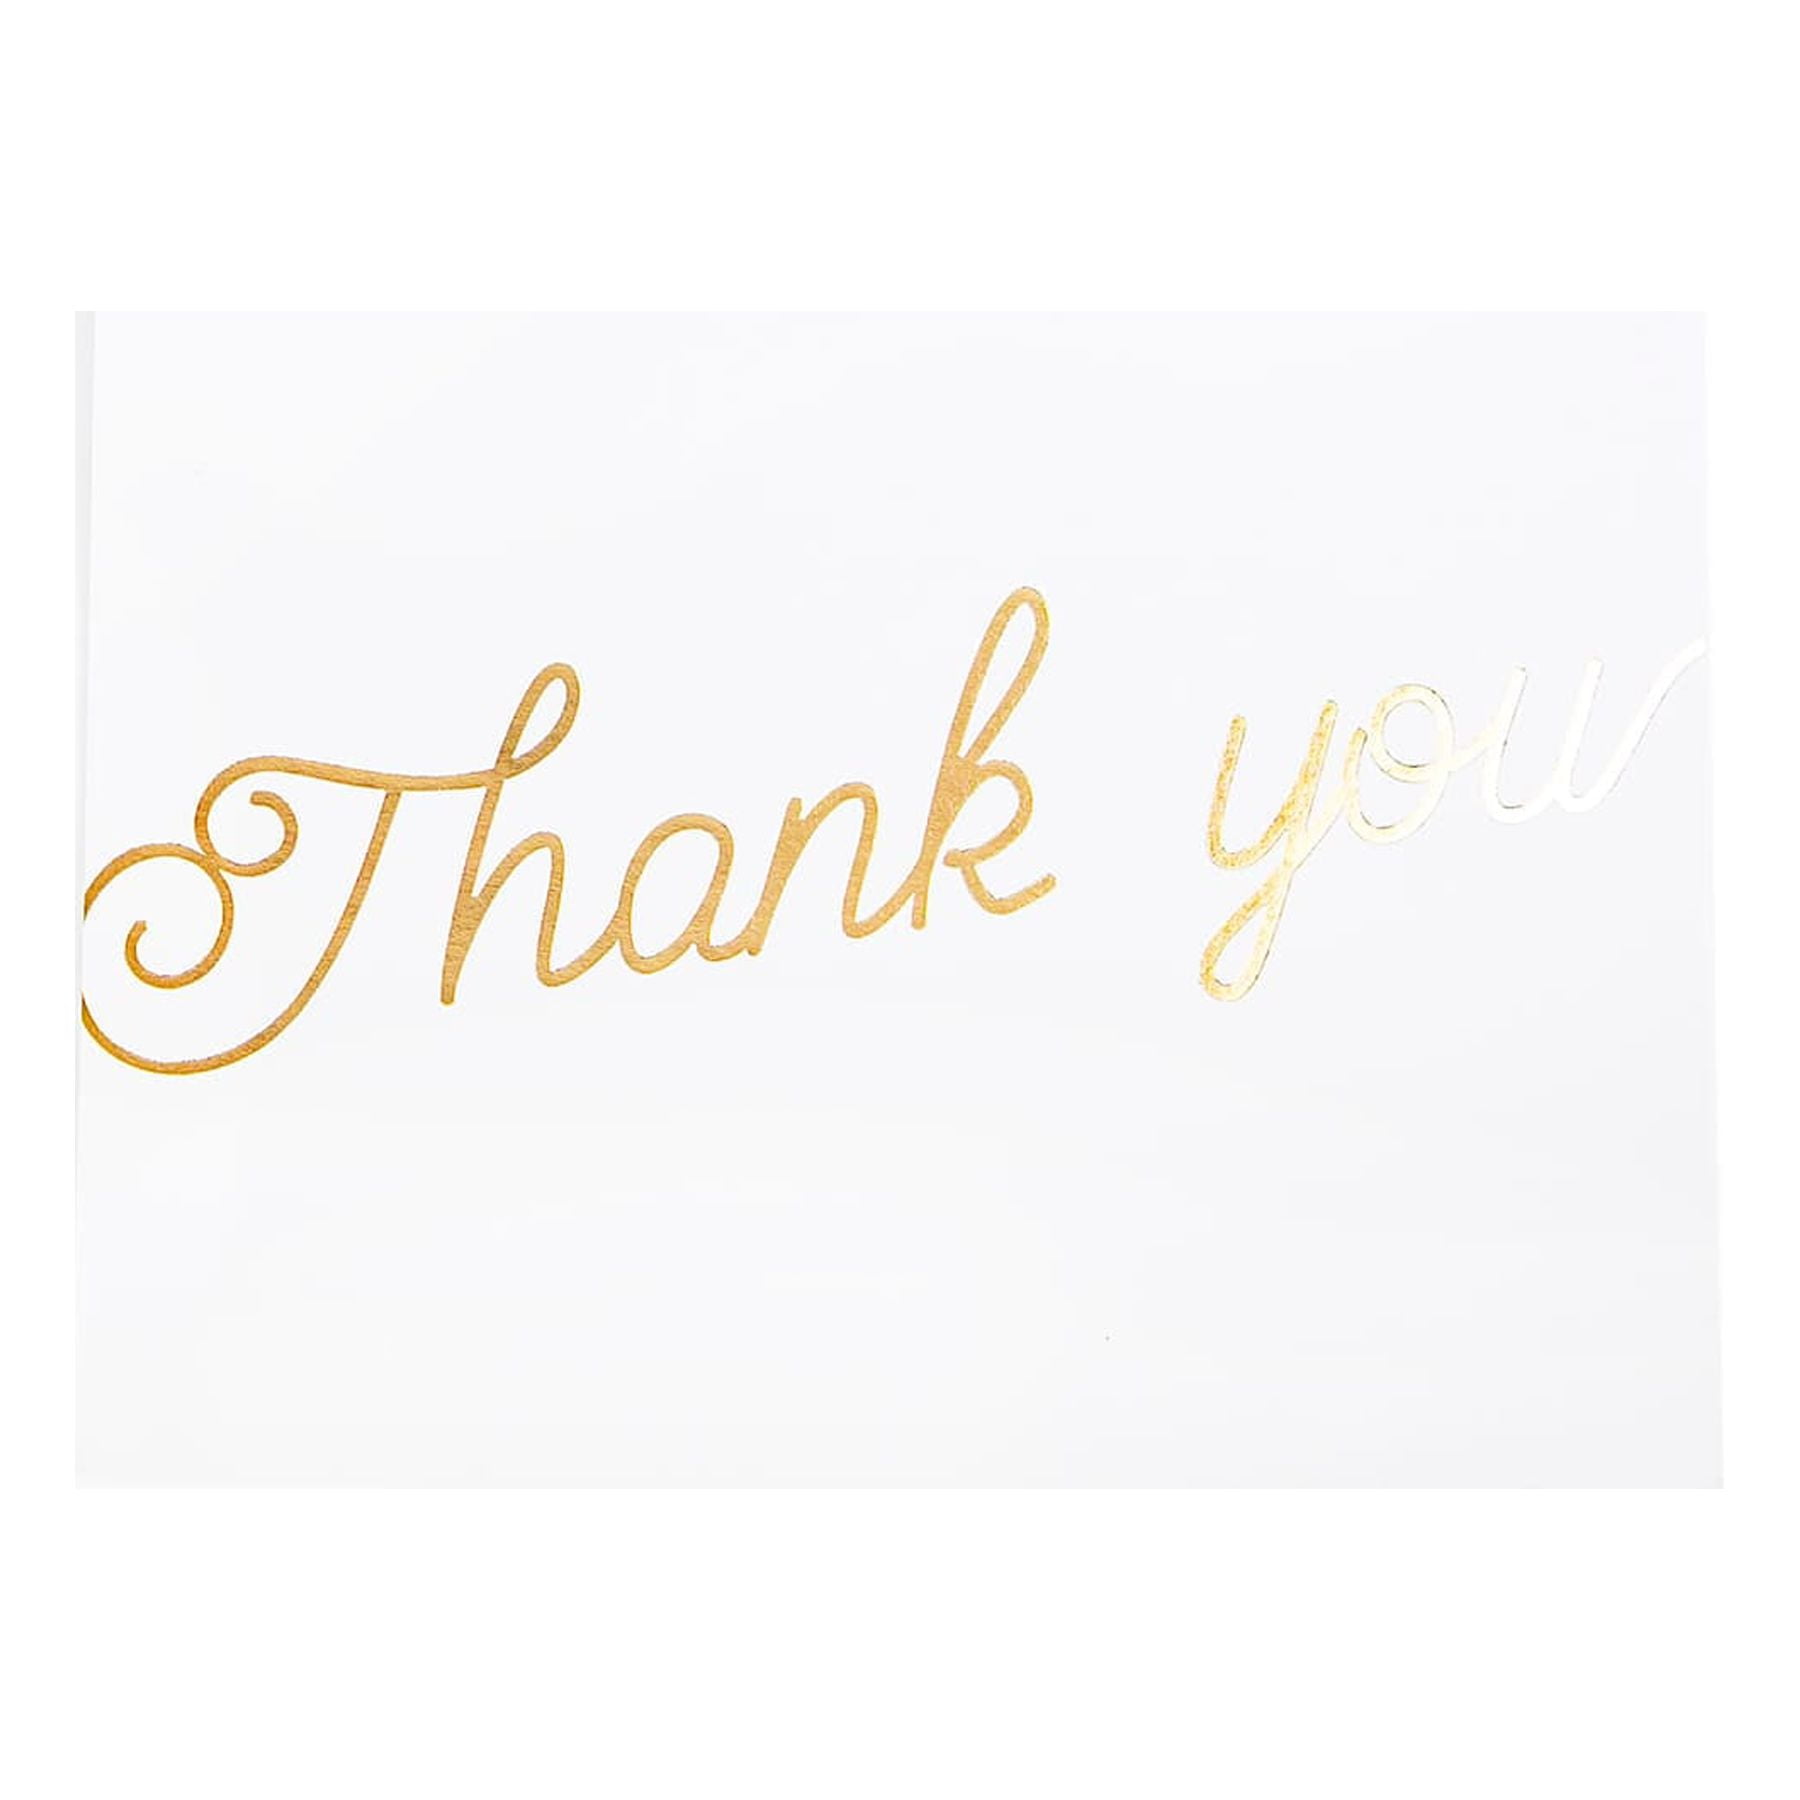 Papyrus Swirl Boxed Blank Thank You Cards, 14ct 